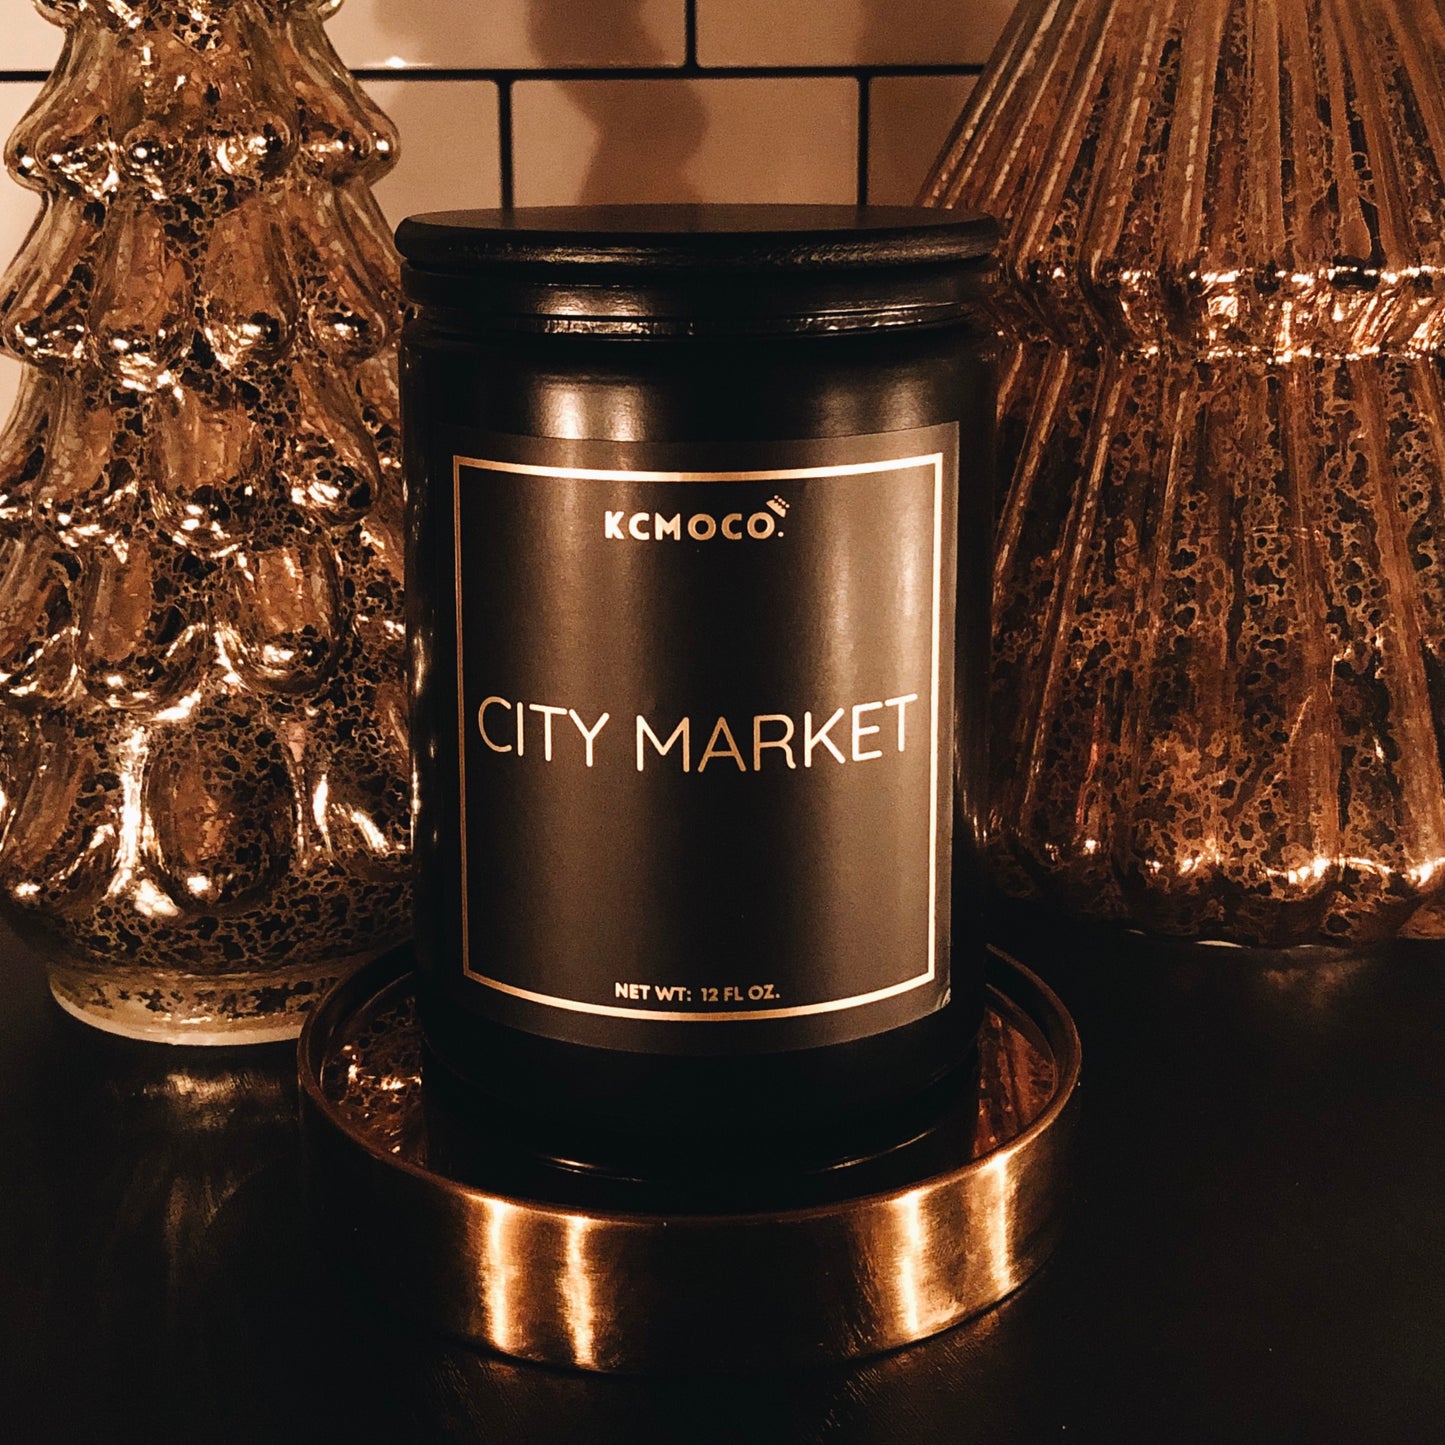 KCMOCO. Candles City Market Candle in Classic Collection Jar: Black glass jar with gold foil label reading "KCMOCO. City Market", with black bamboo lid, environmental photo against backdrop of gold Christmas trees.